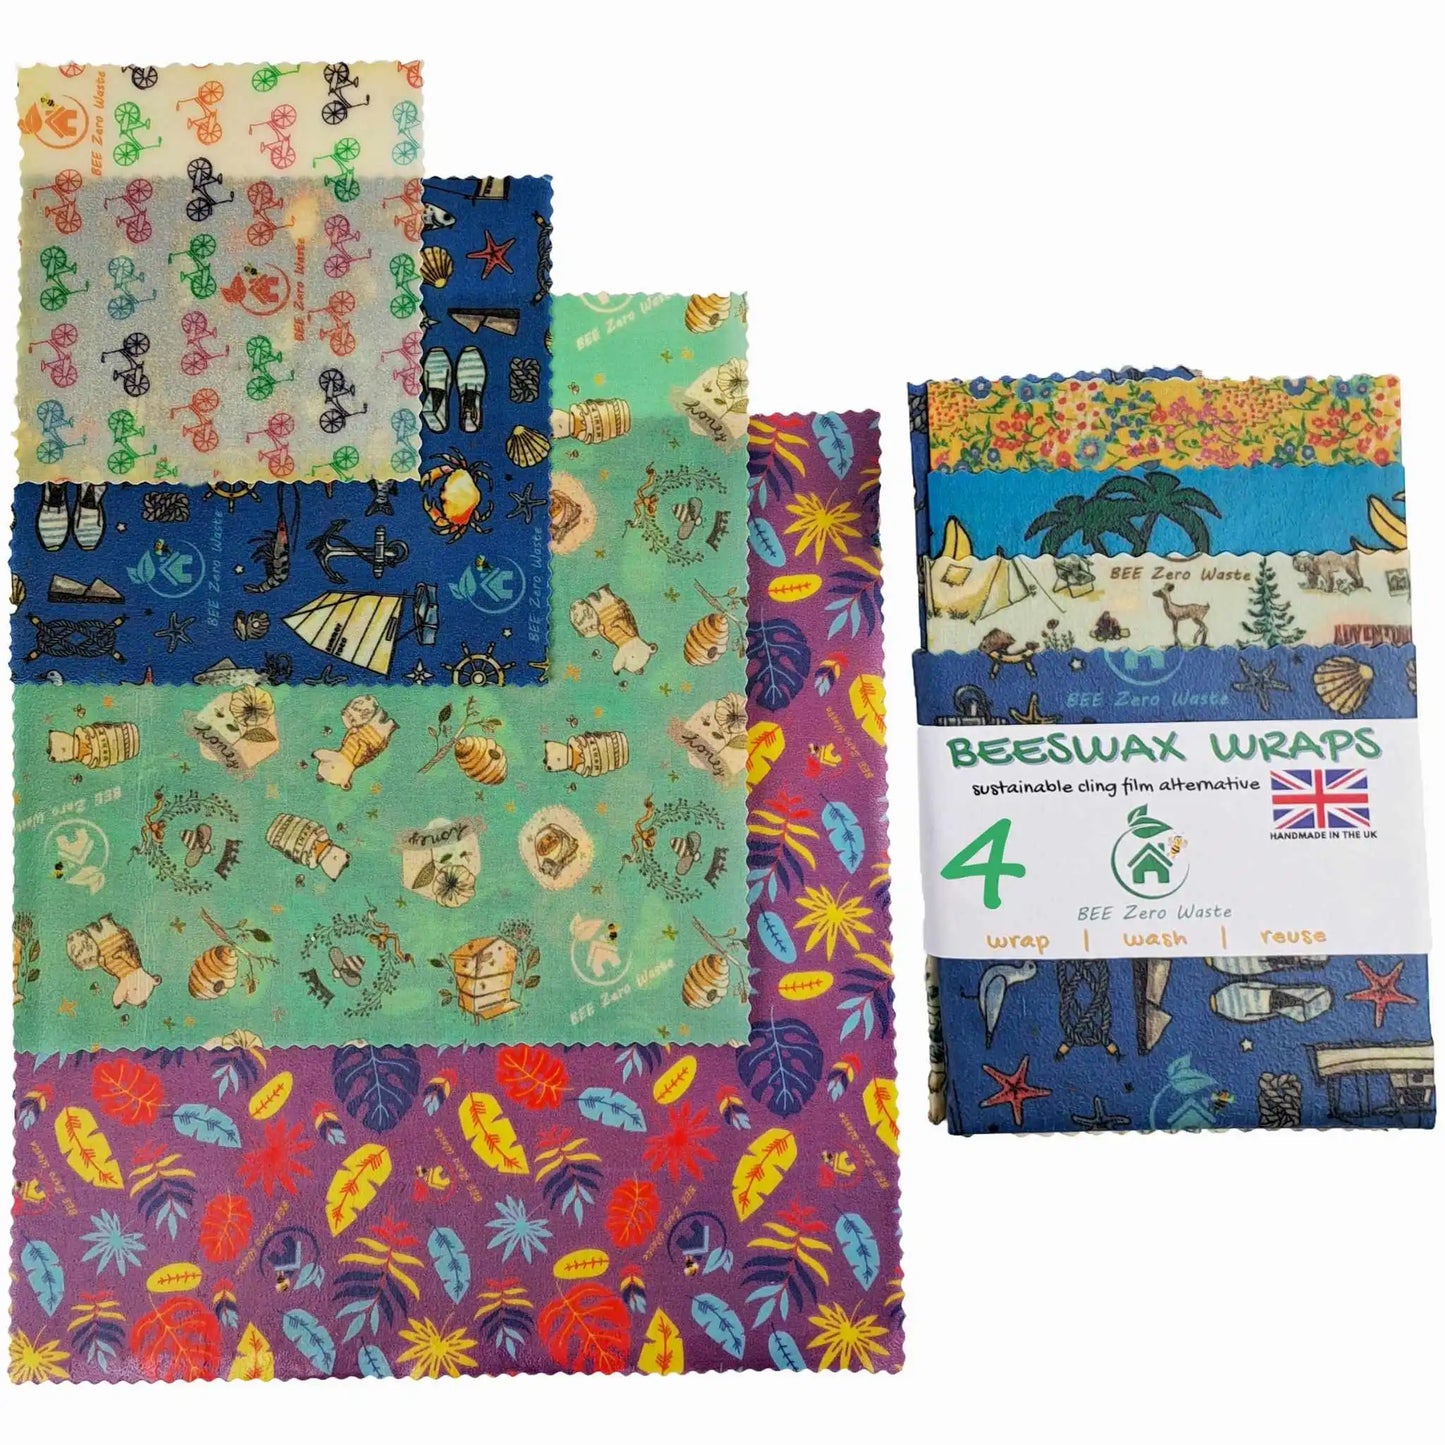 Colorful set of natural beeswax wraps used for keeping food fresh and reducing household waste.